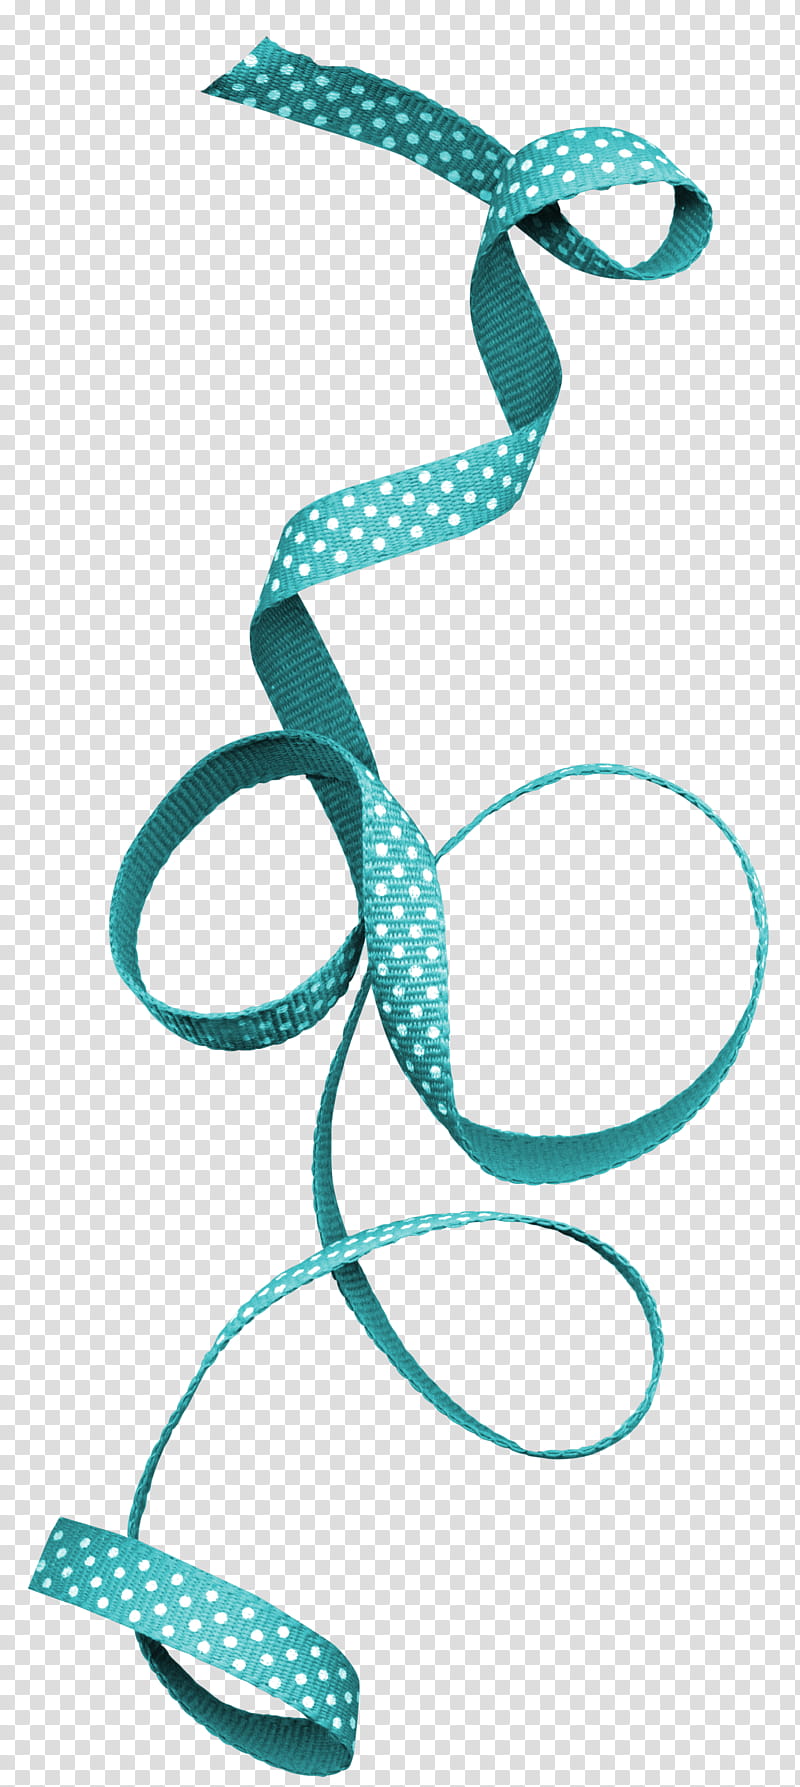 Bows, teal and white polka-dot strap transparent background PNG clipart